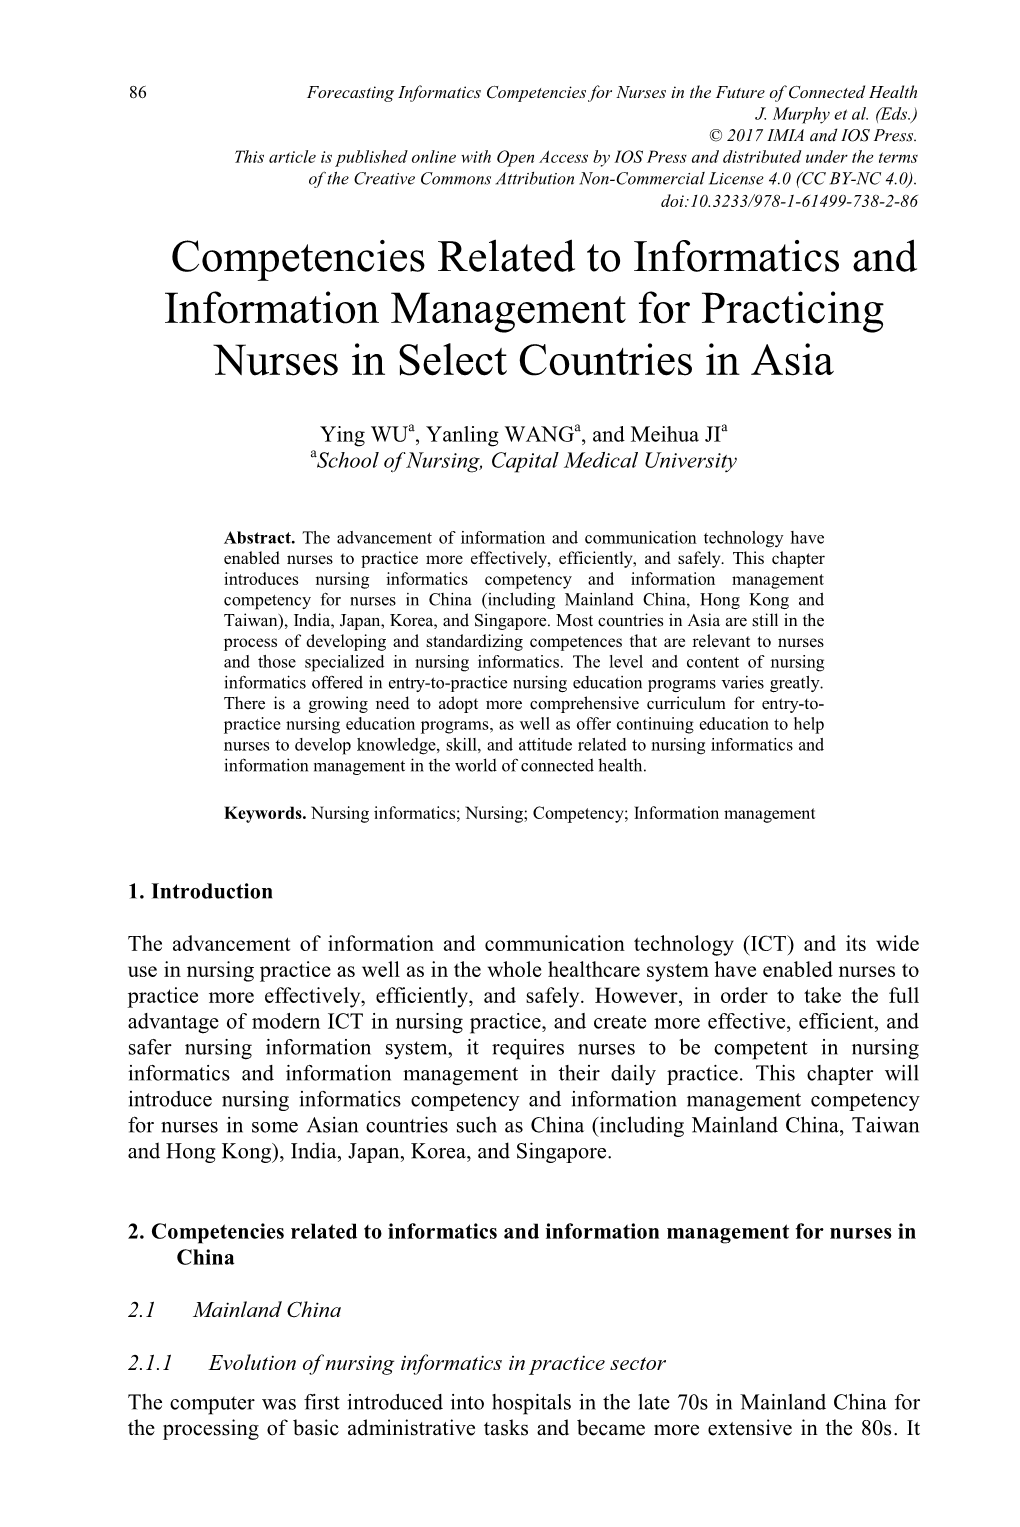 Competencies Related to Informatics and Information Management for Practicing Nurses in Select Countries in Asia